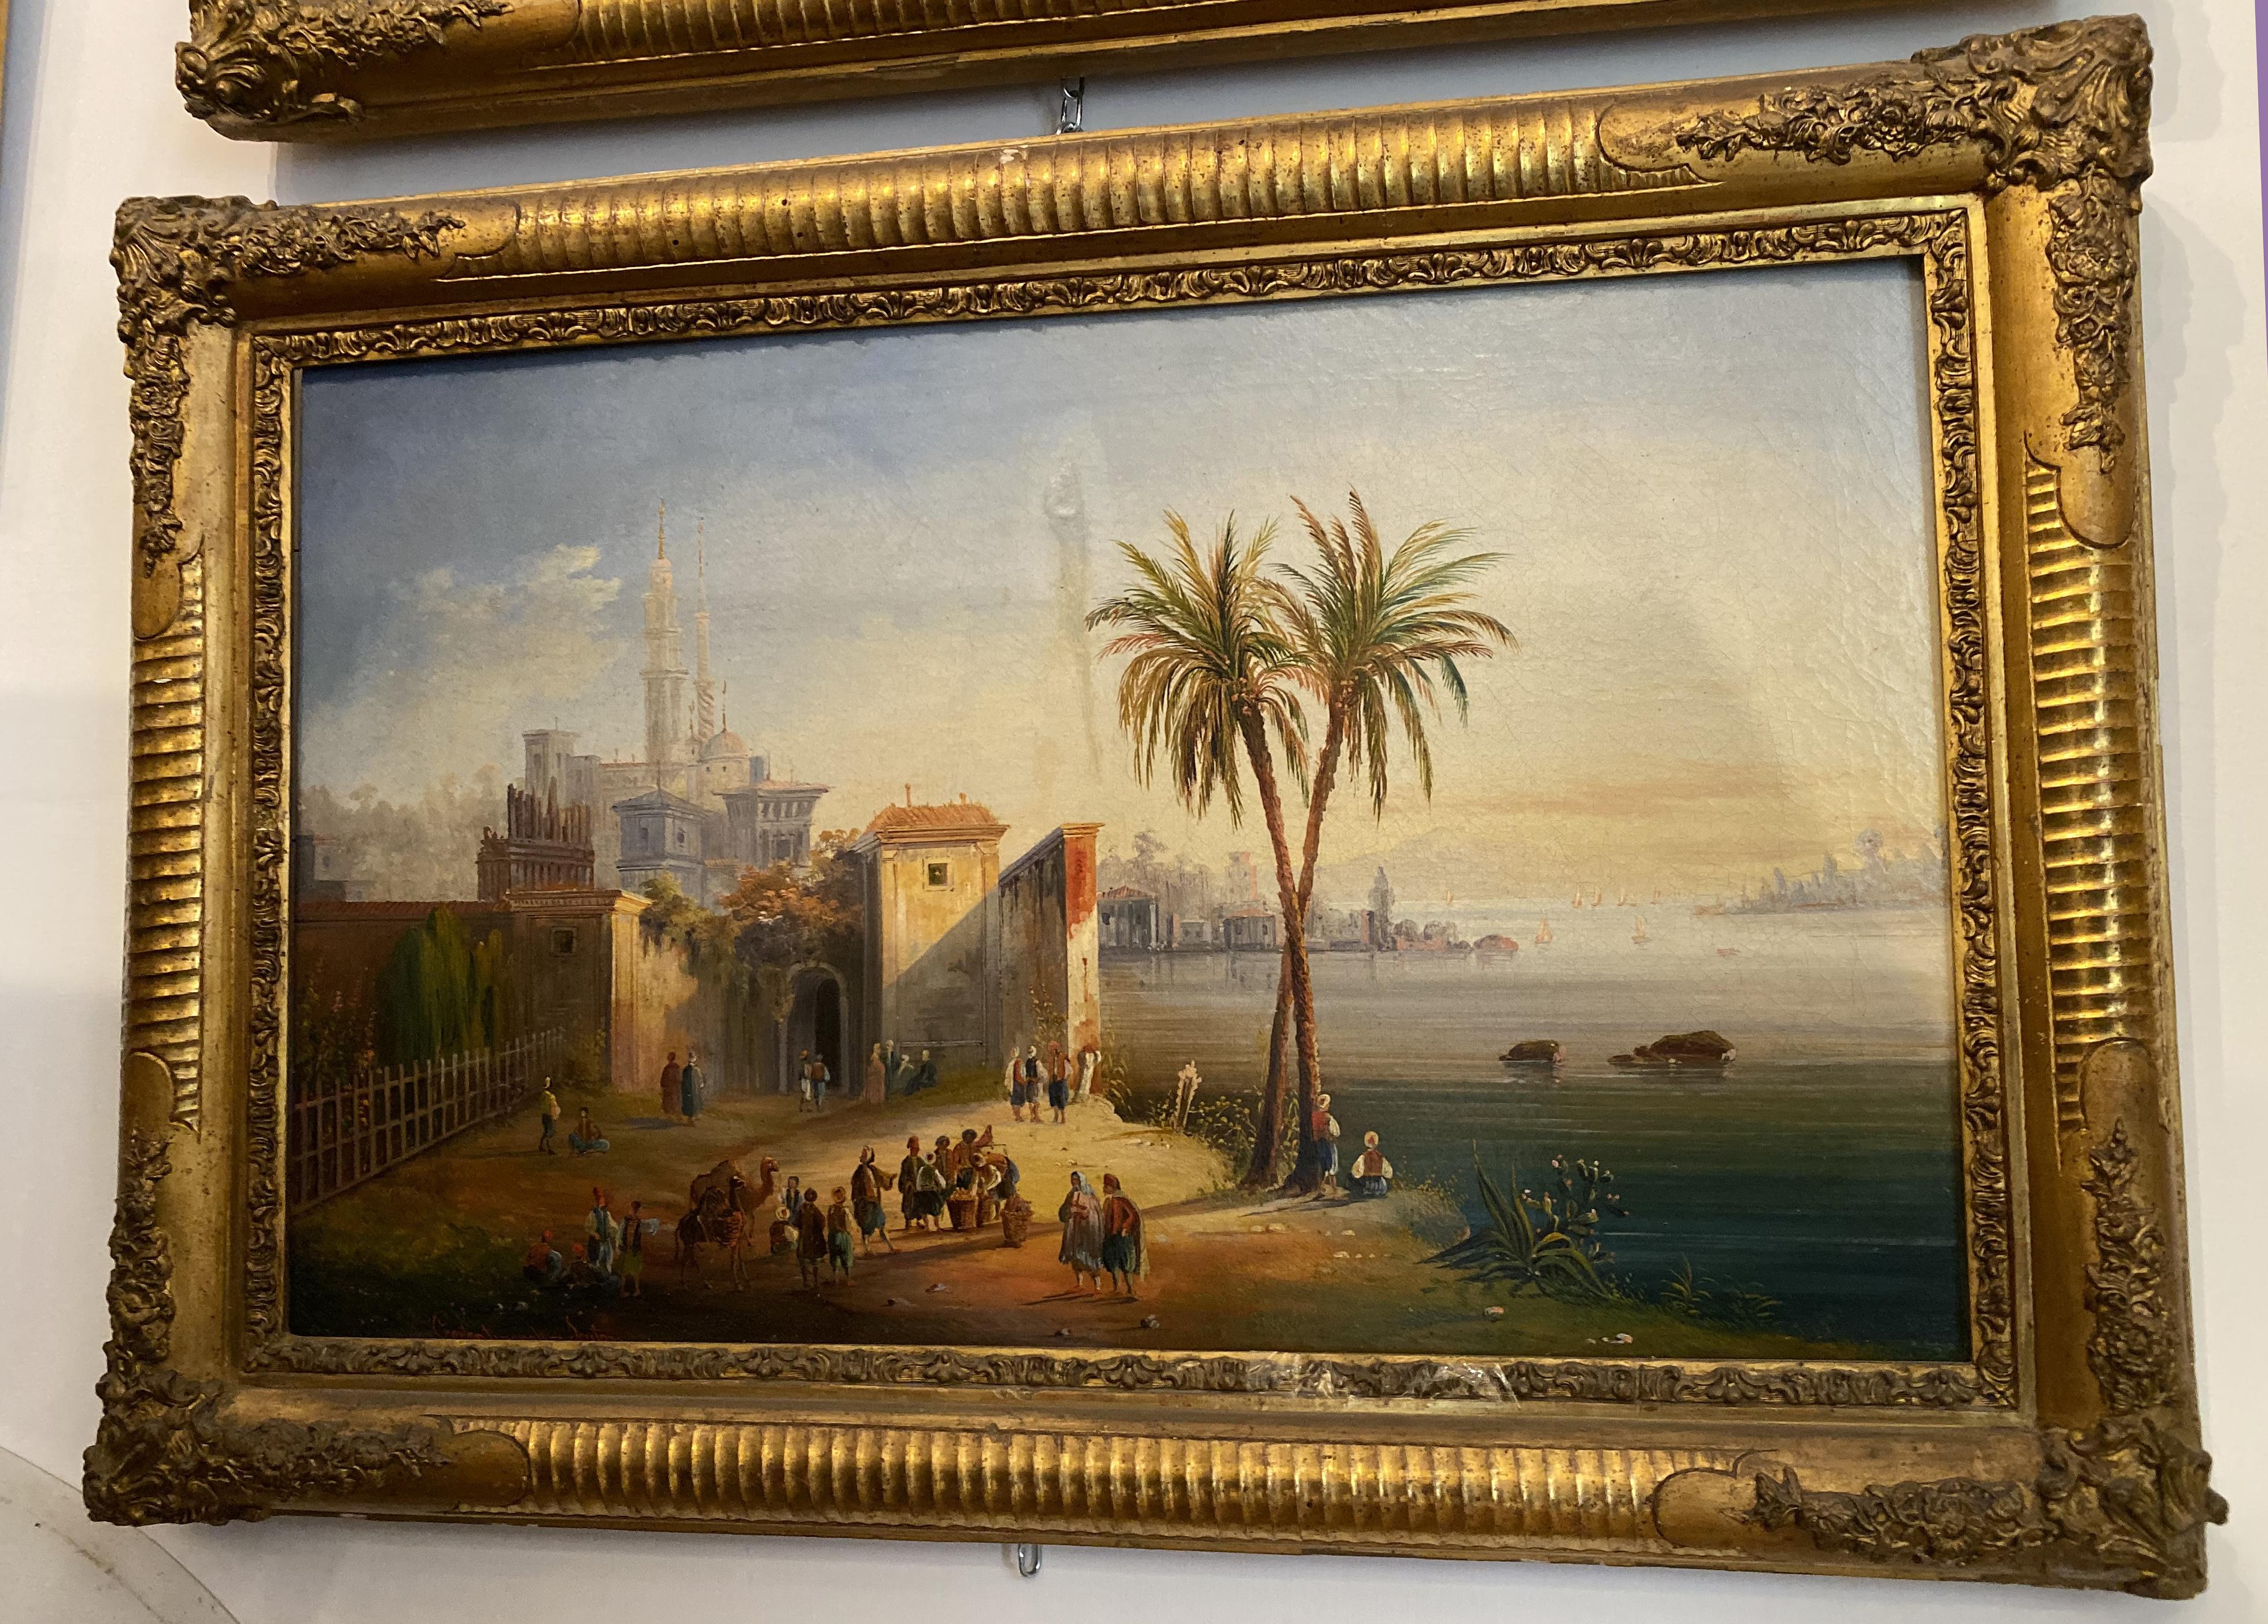 Exceptional Pair of Turkish Landscape Paintings inscribed Costantinopoli Scutari 4